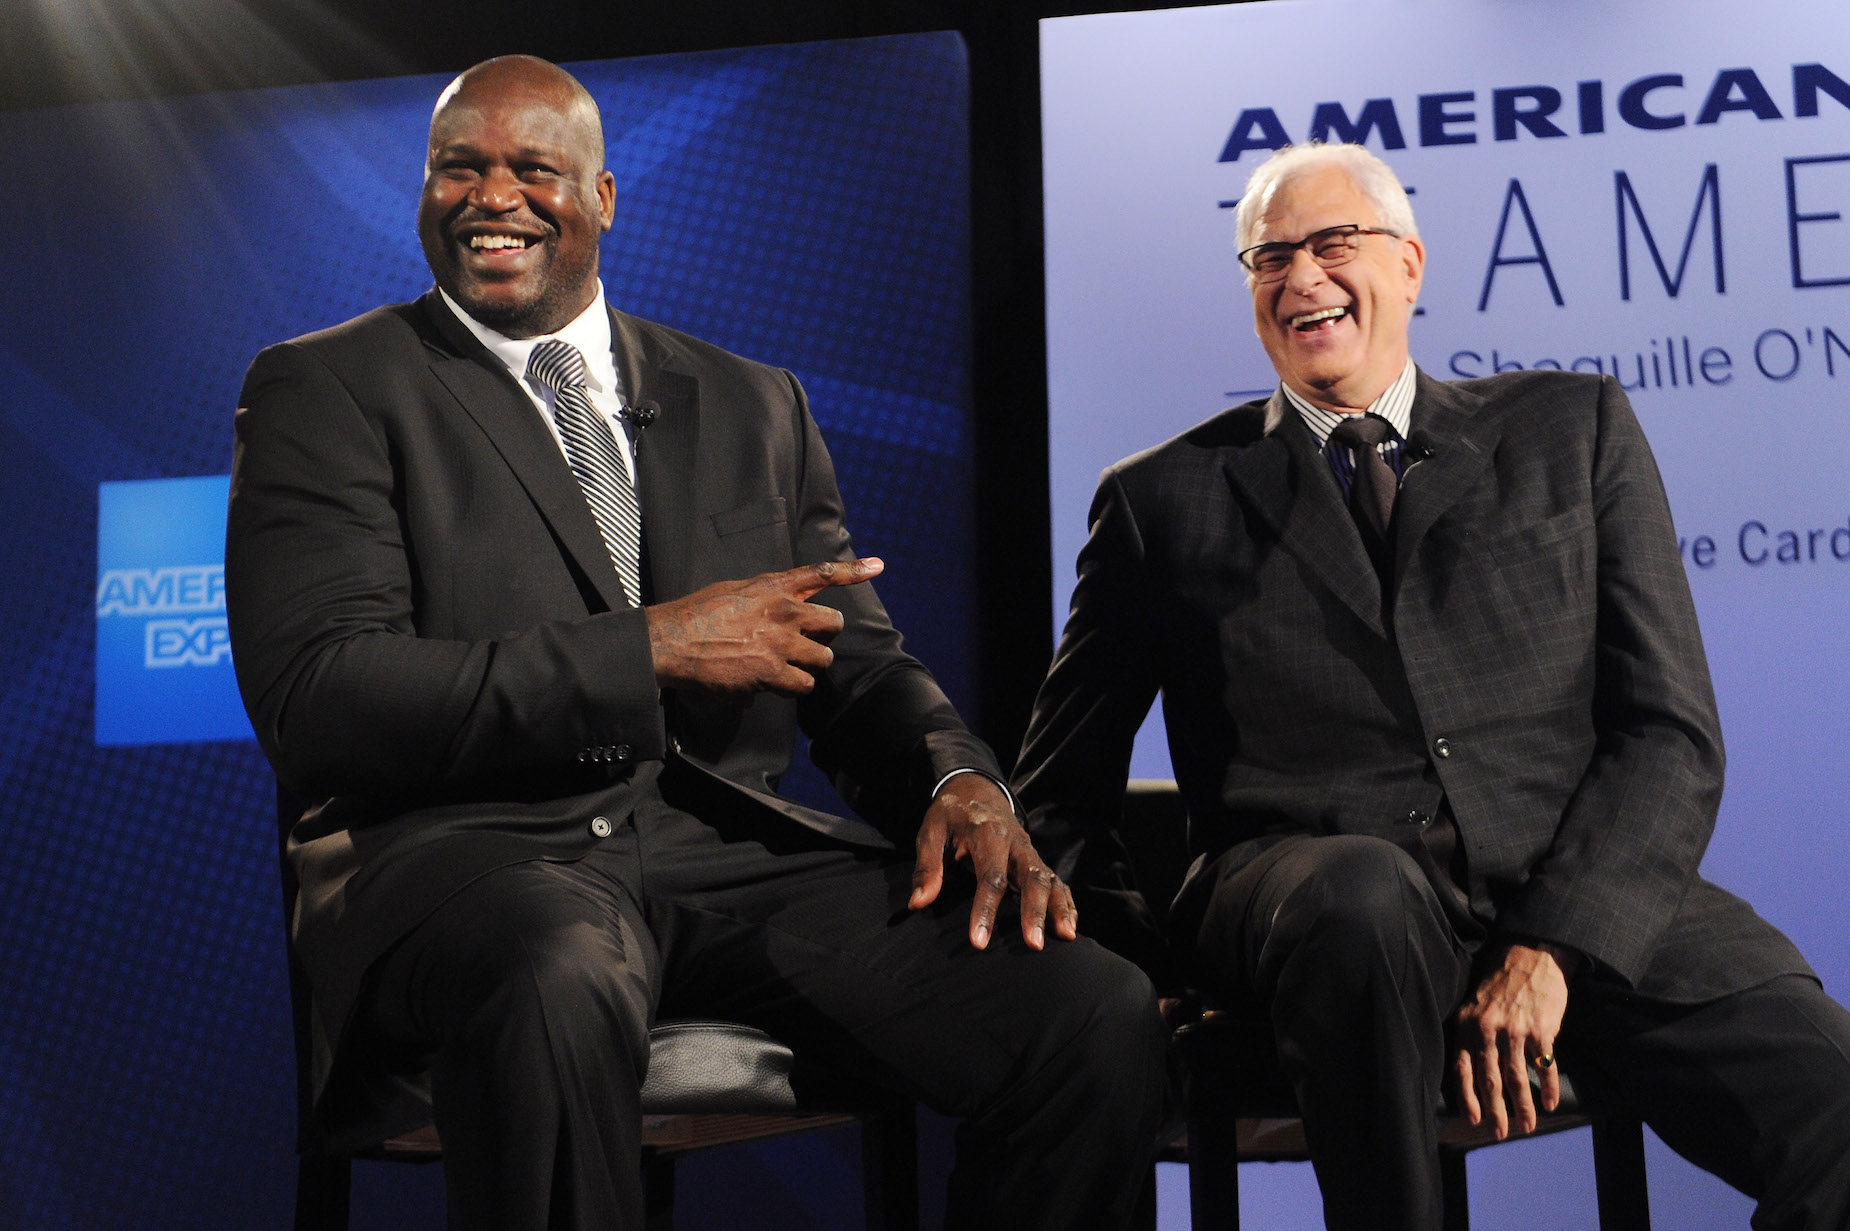 Shaquille O'Neal has become a business success, at least in part, thanks to Phil Jackson's guidance.